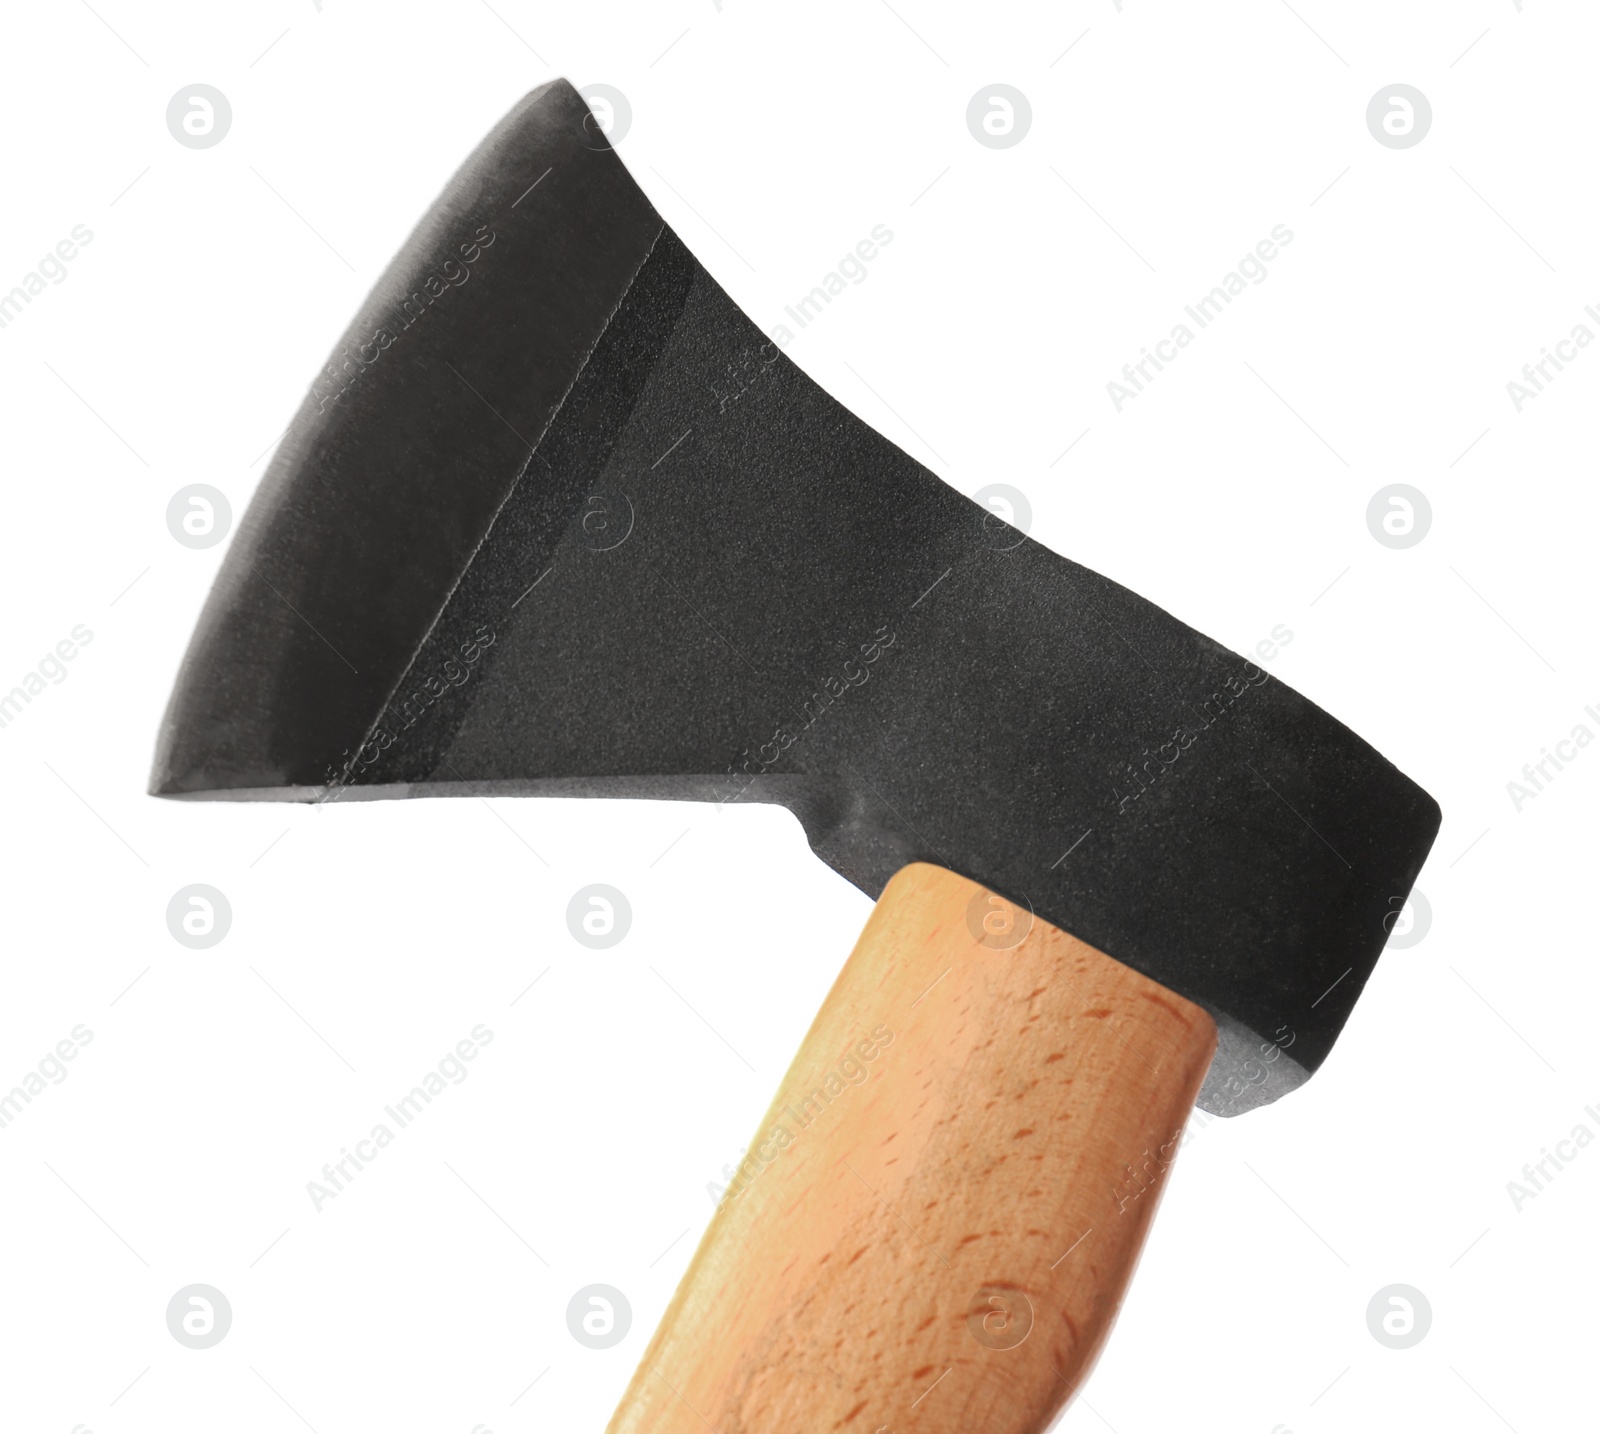 Photo of Metal ax with wooden handle isolated on white